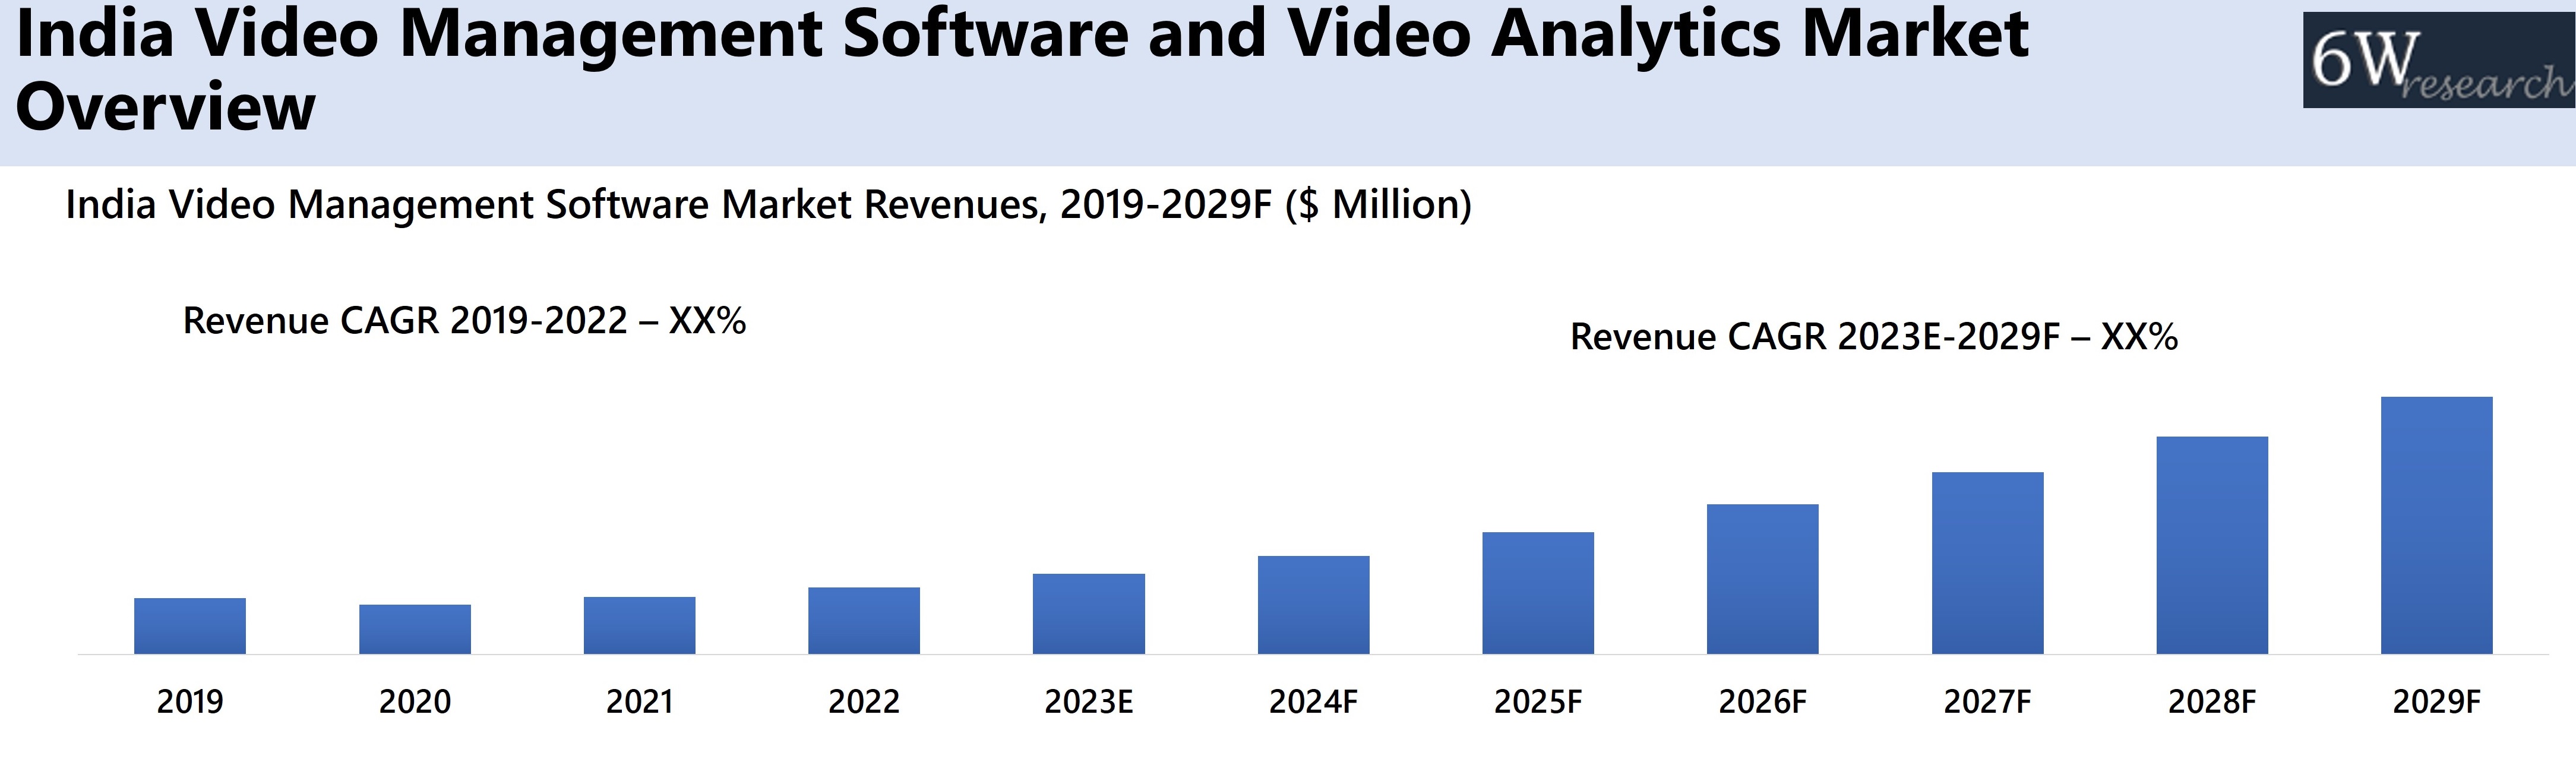 India Video Management Software and Video Analytics Market Overview